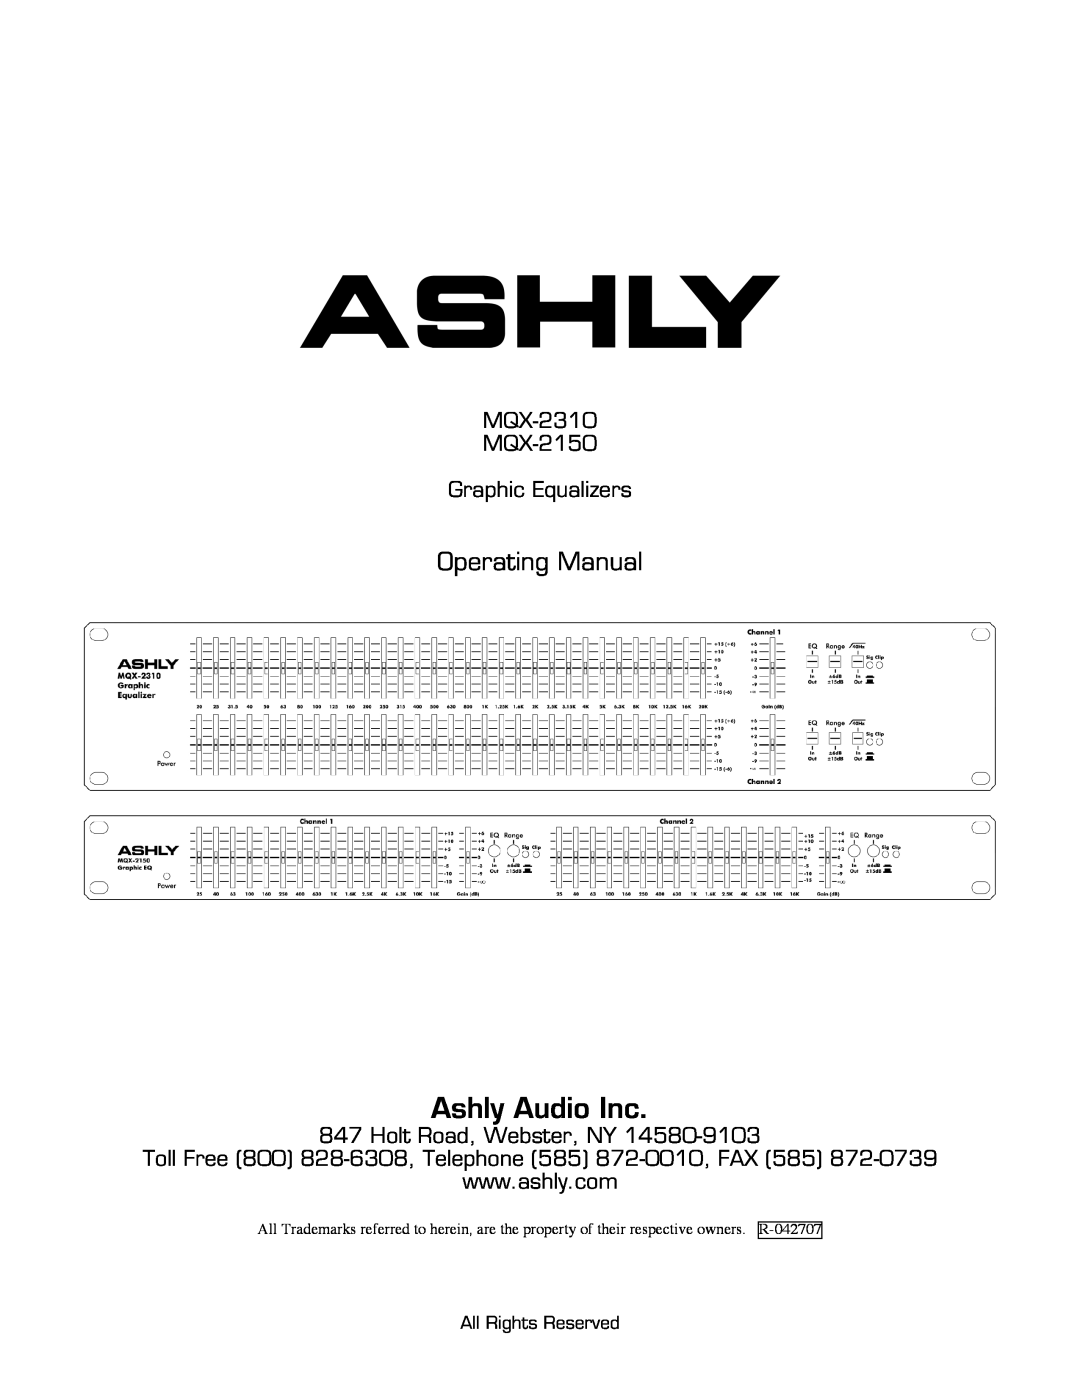 Ashly manual Operating Manual, MQX-2310 MQX-2150 Graphic Equalizers, Holt Road, Webster, NY, Ashly Audio Inc 